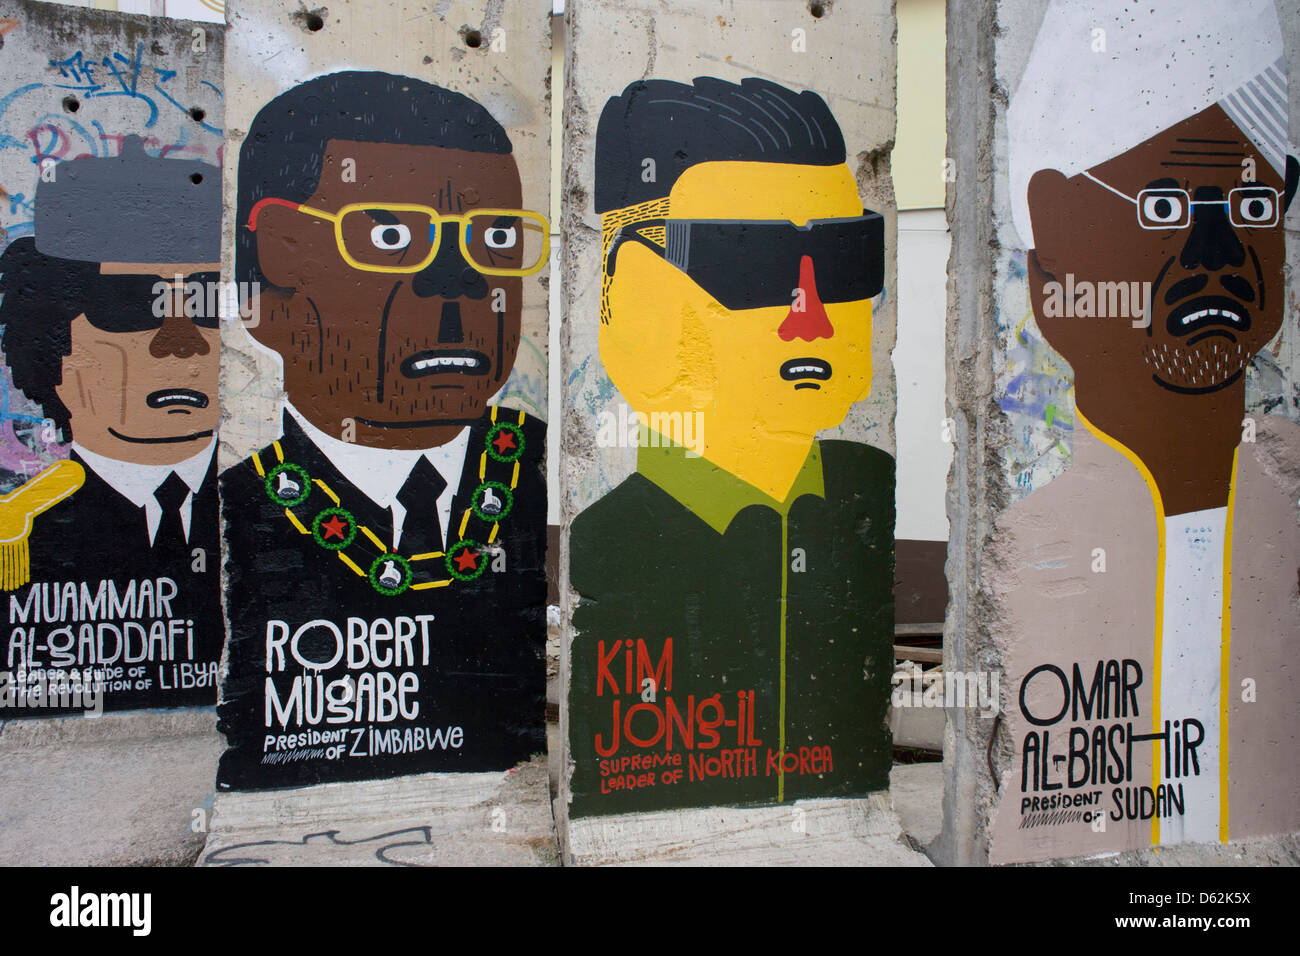 World dictators adorn old sections of the old Berlin Wall opposite the former Checkpoint Charlie, the former border between Communist East and West Berlin during the Cold War. The Berlin Wall was a barrier constructed by the German Democratic Republic (GDR, East Germany) starting on 13 August 1961, that completely cut off (by land) West Berlin from surrounding East Germany and from East Berlin. .. (More in Description). Stock Photo